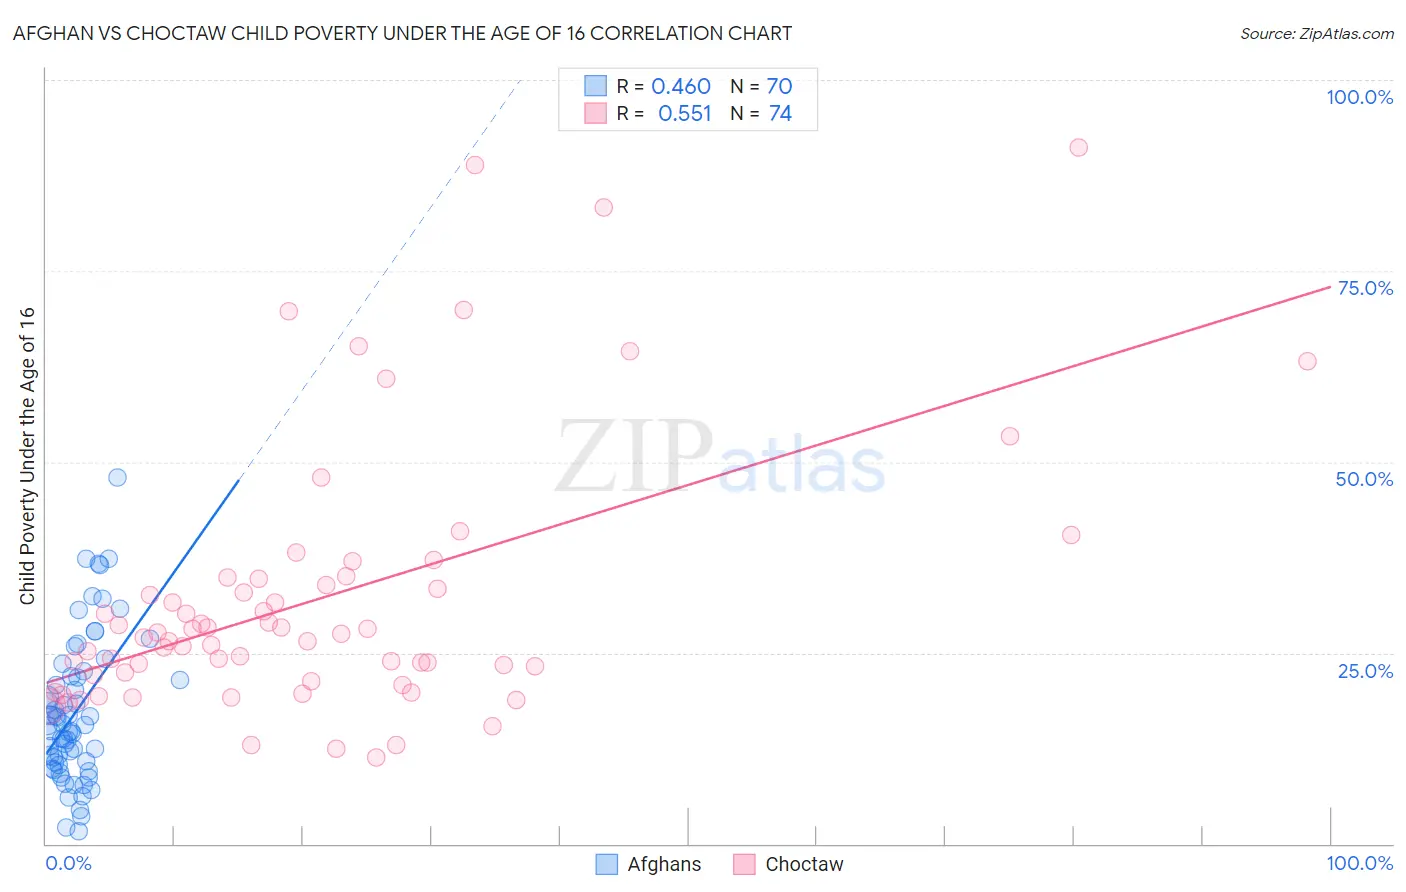 Afghan vs Choctaw Child Poverty Under the Age of 16